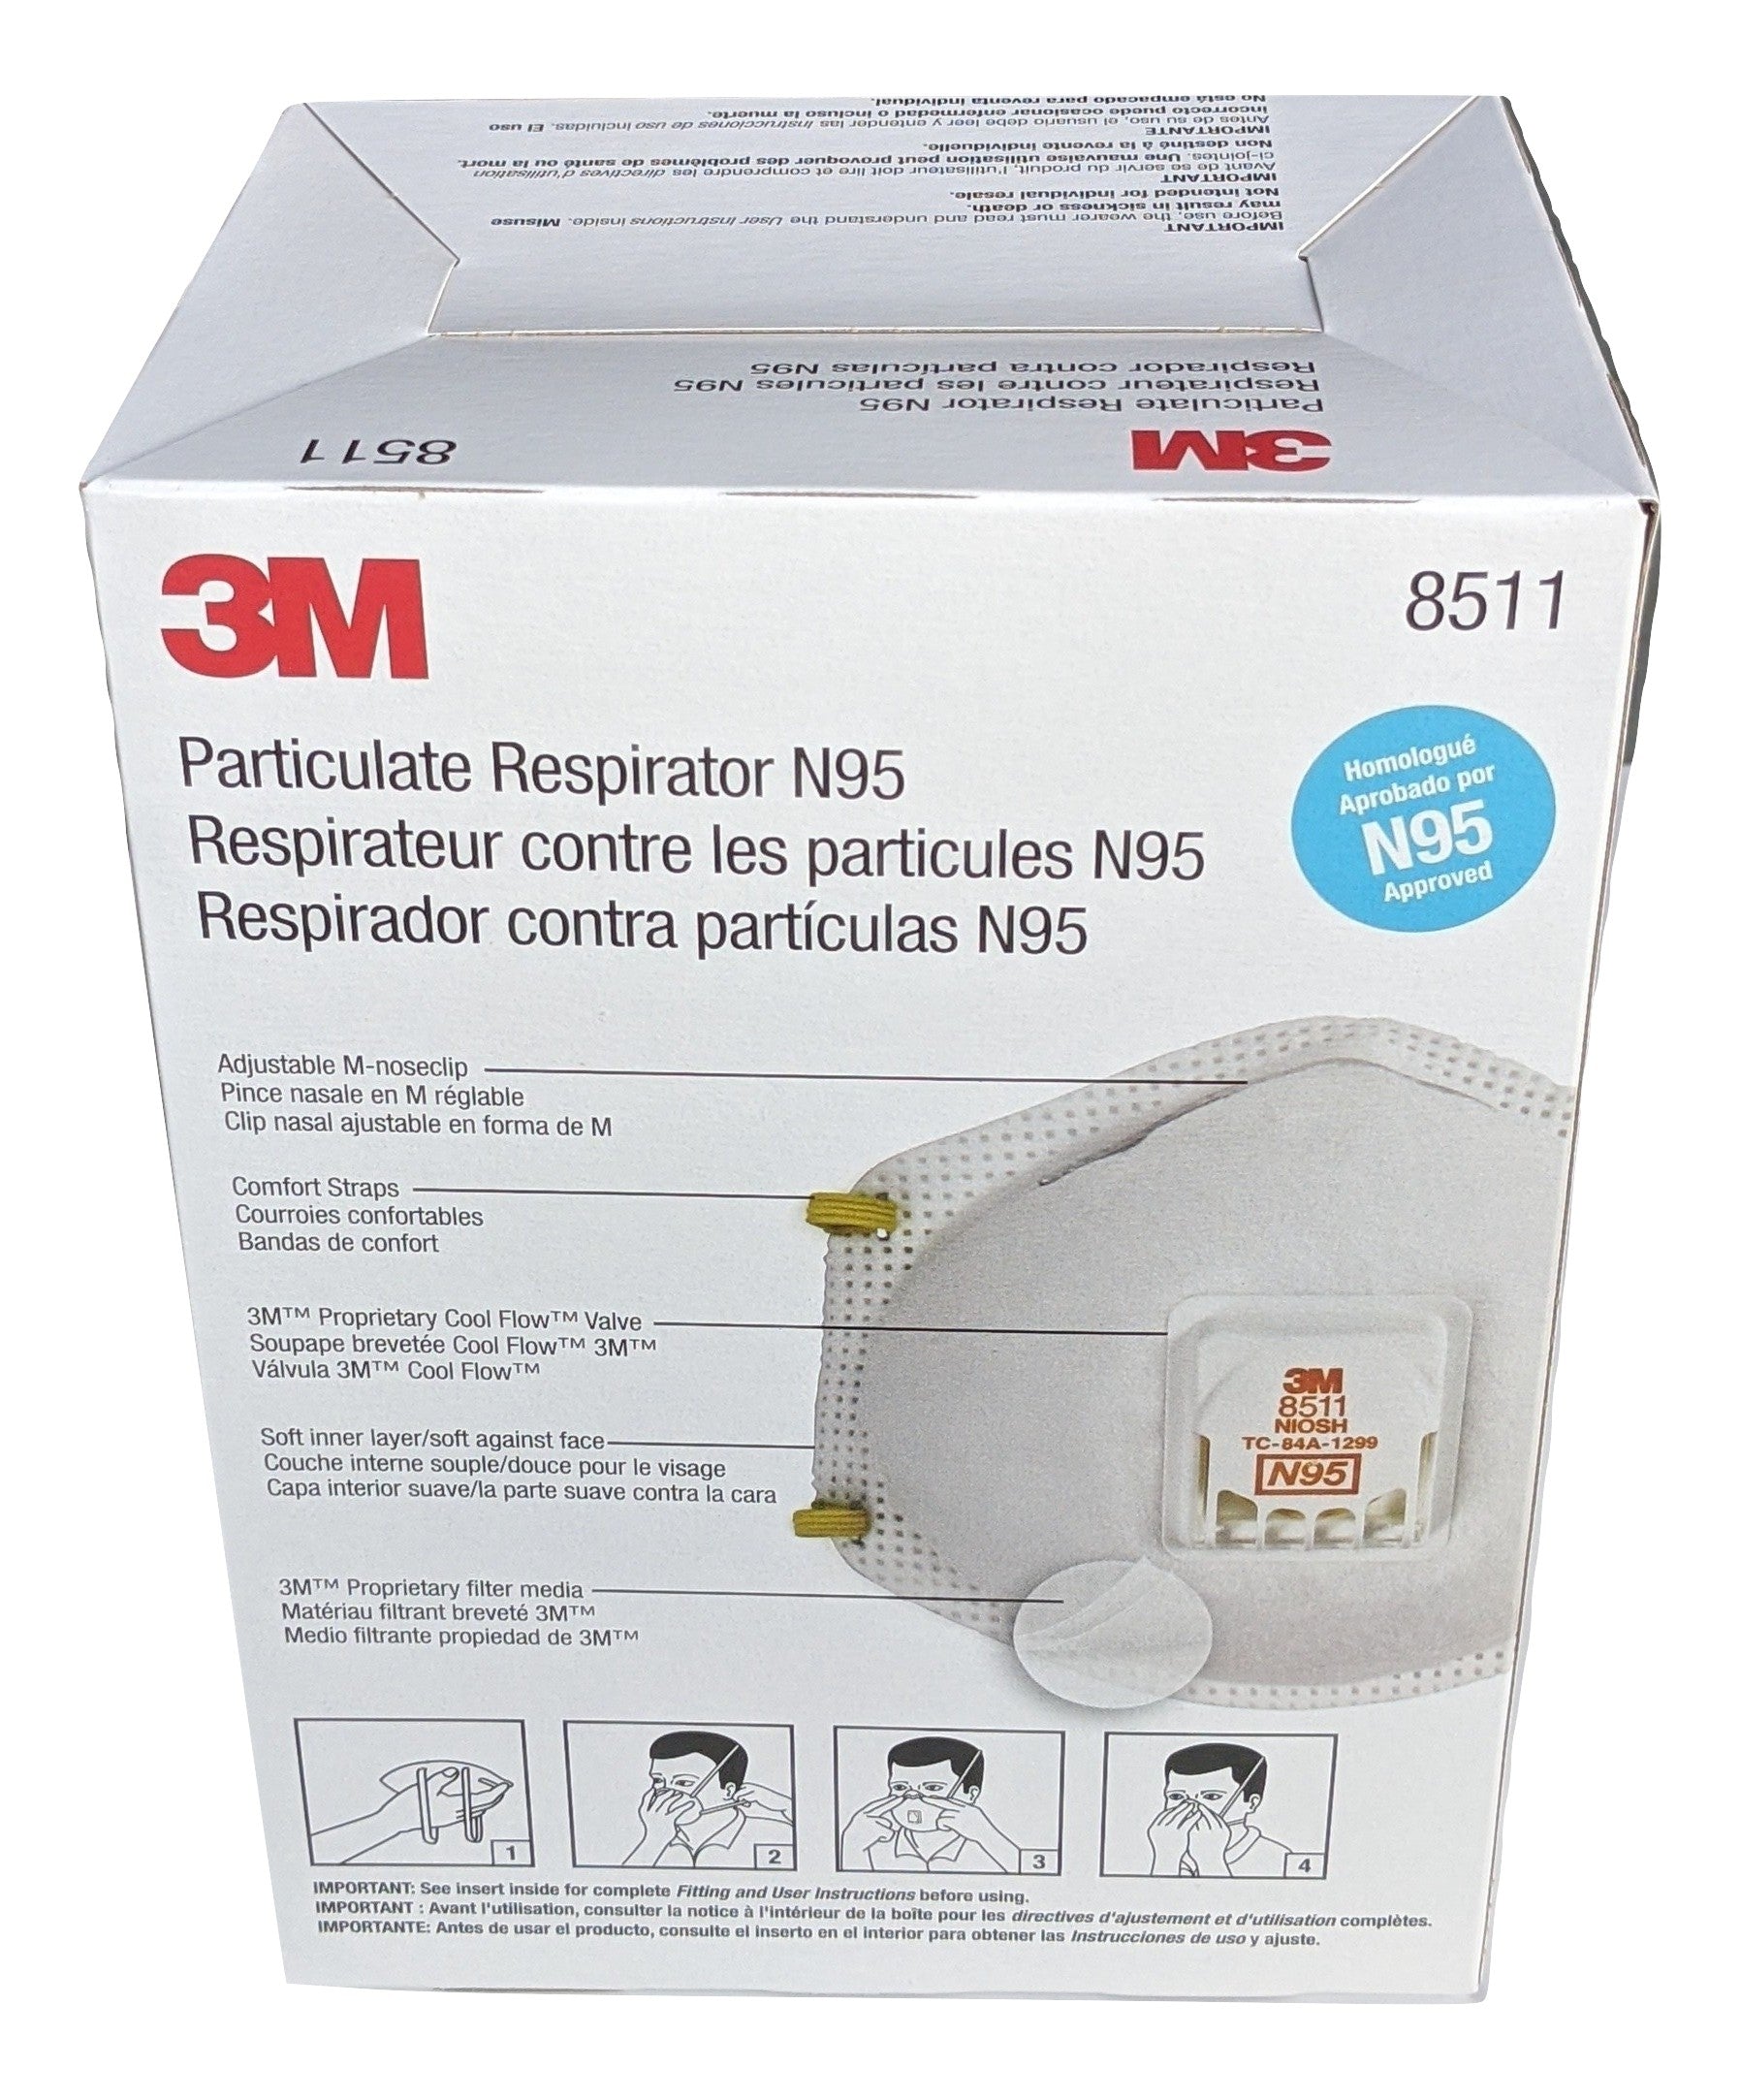 3M 8511 N95 Particulate Respirator disposable mask, NIOSH approved - Box of 10